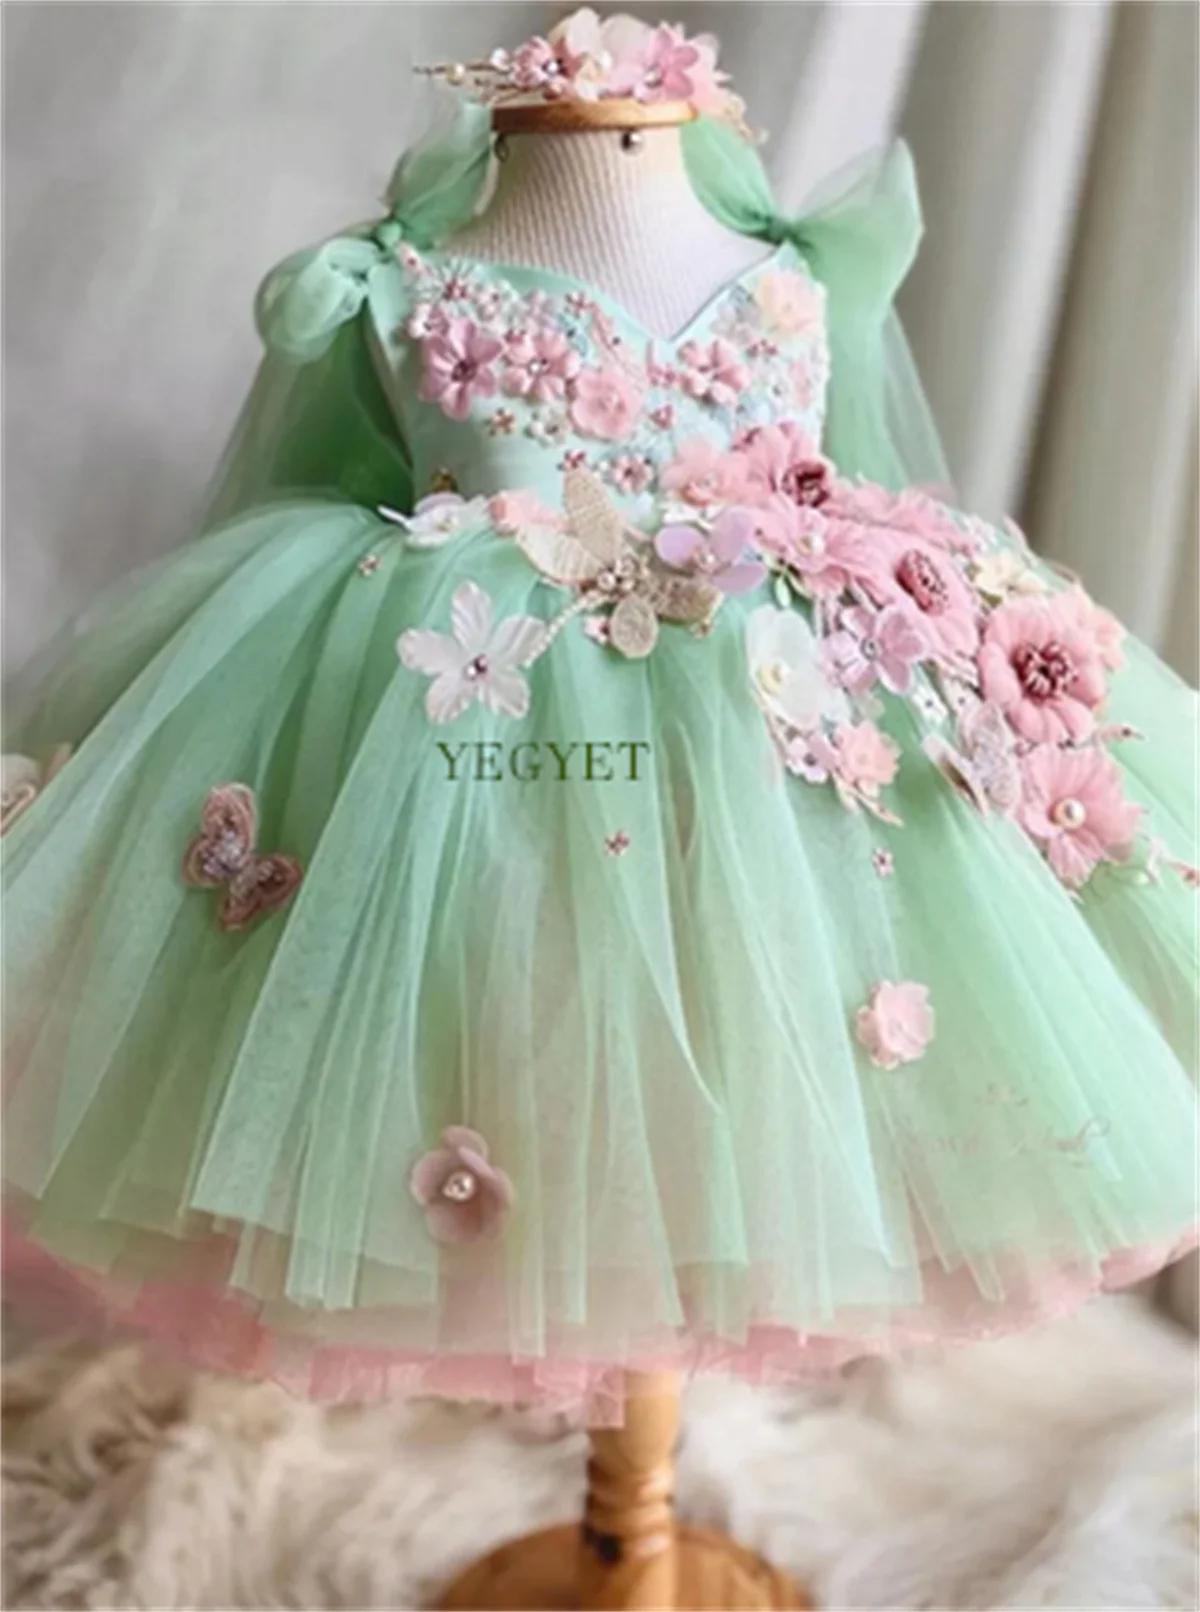 

New Coming Baby Girls Party Dresses Infant 1 Year Birthday Big Bow Princess Dress For Baby Girls Bridemaid Gown Vestidos